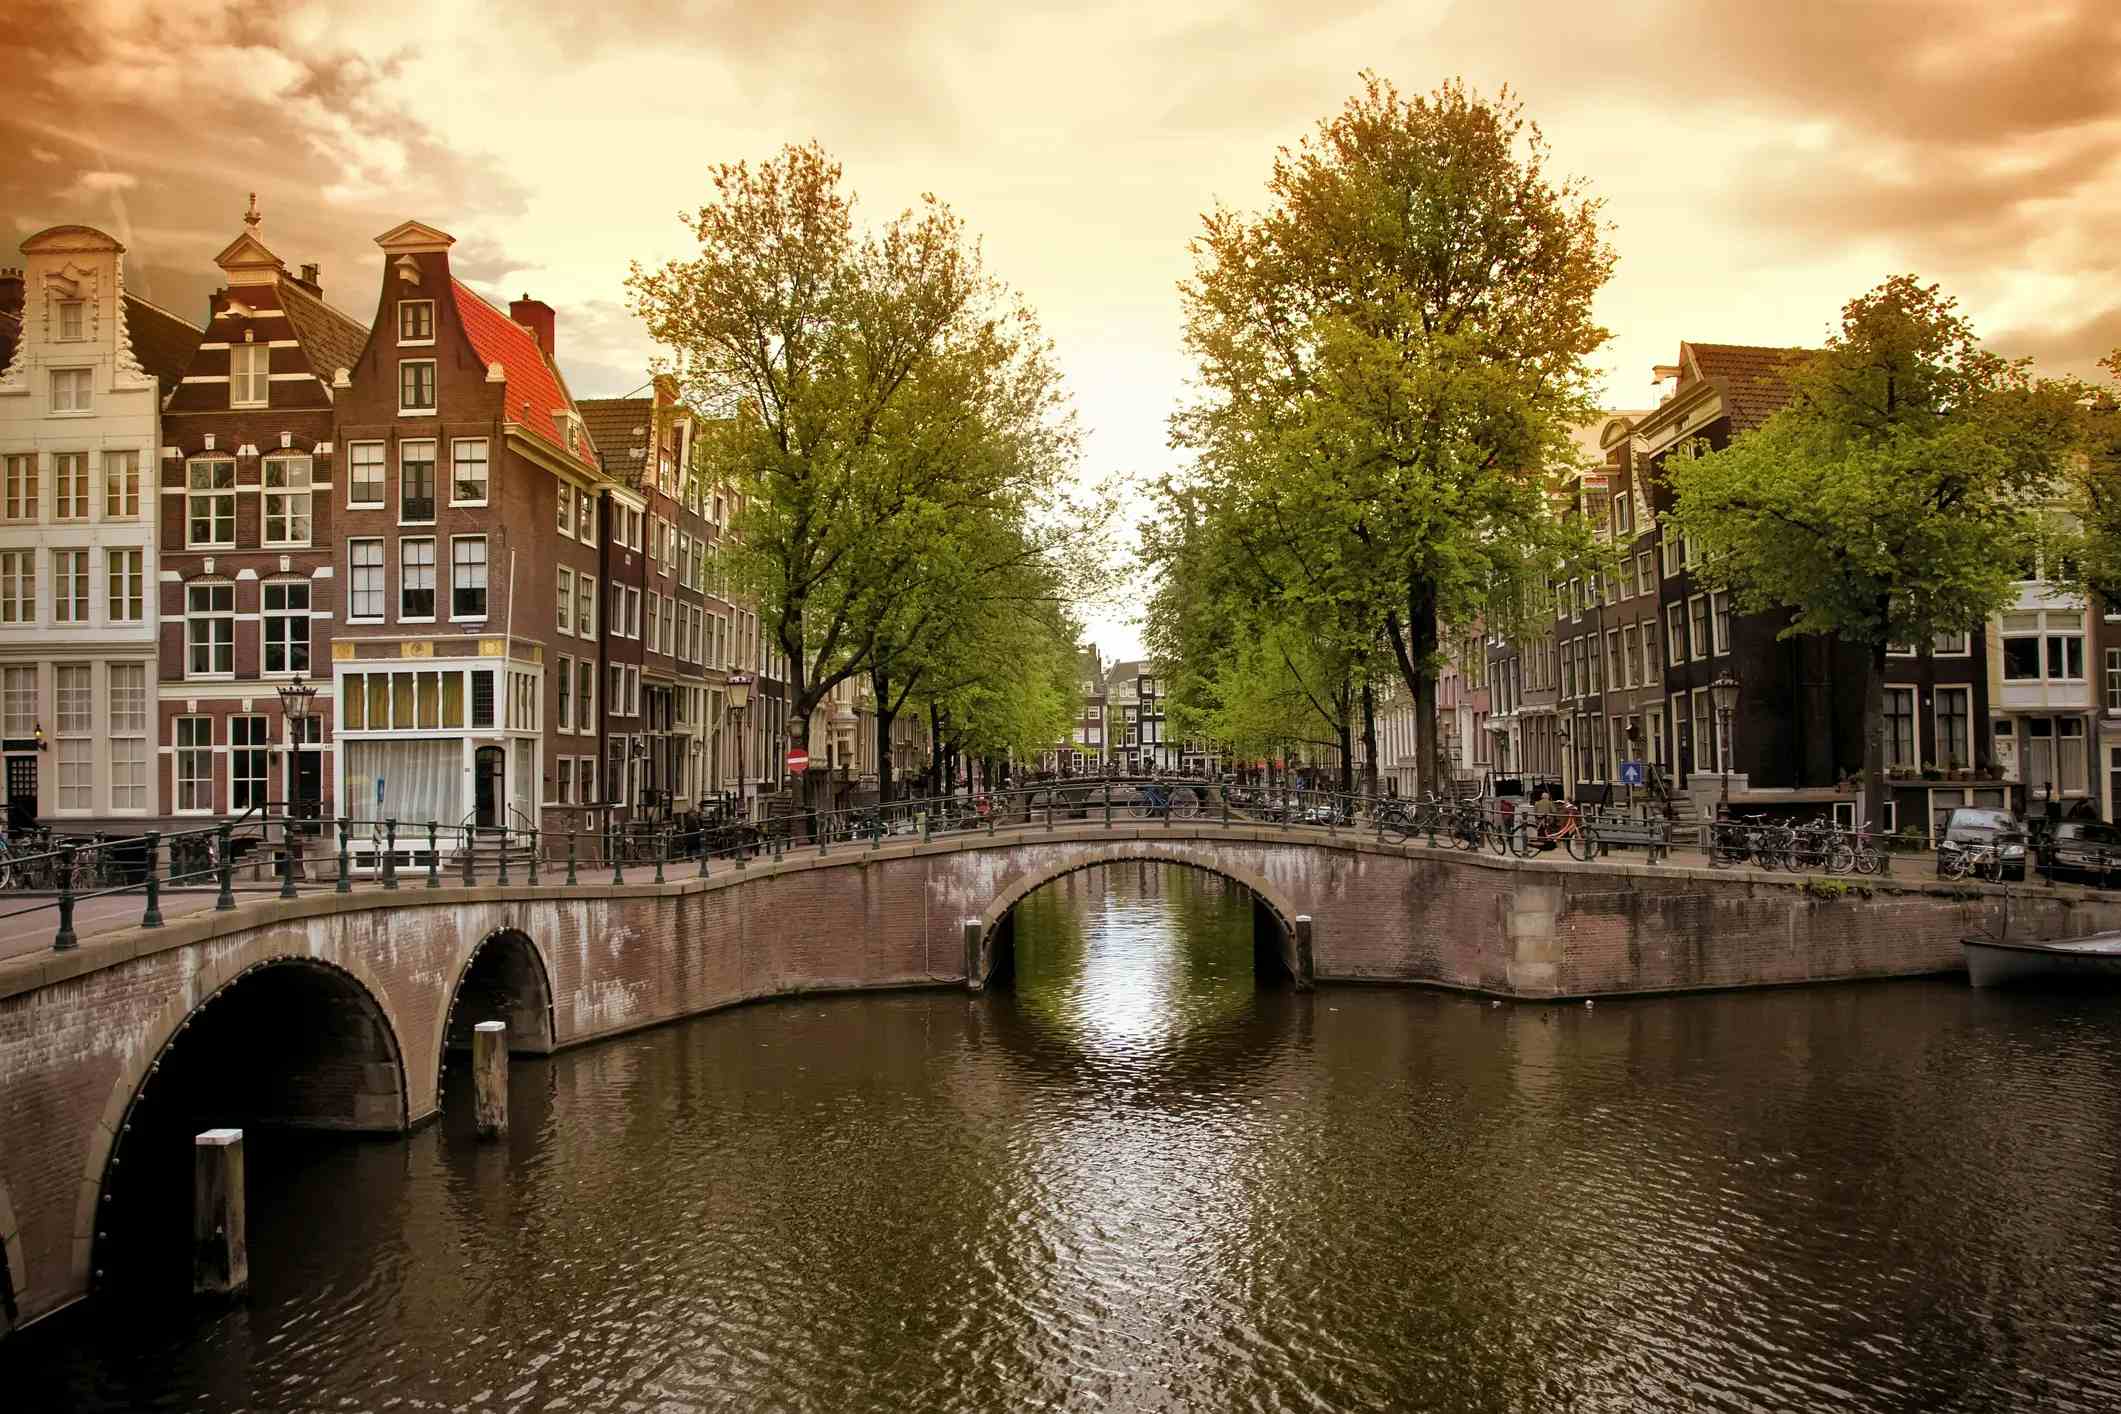 Canals of Amsterdam image